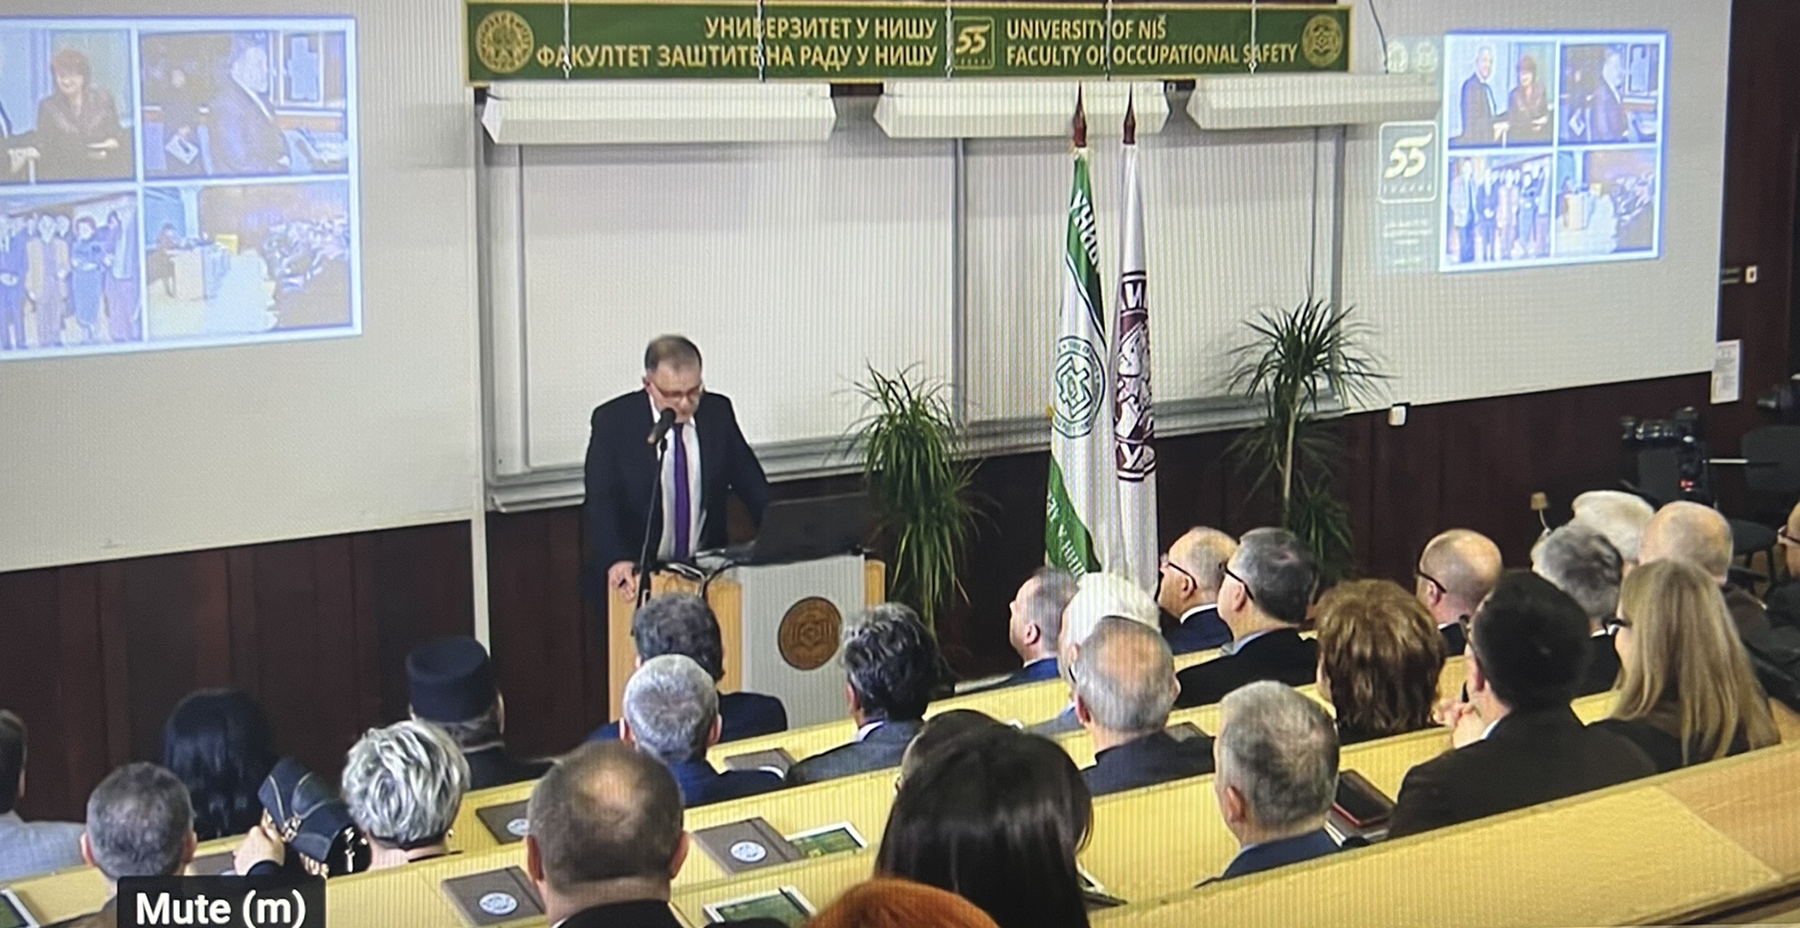 Jubilee Marked - 55 years of Existence оf Faculty of Occupational Safety in Niš